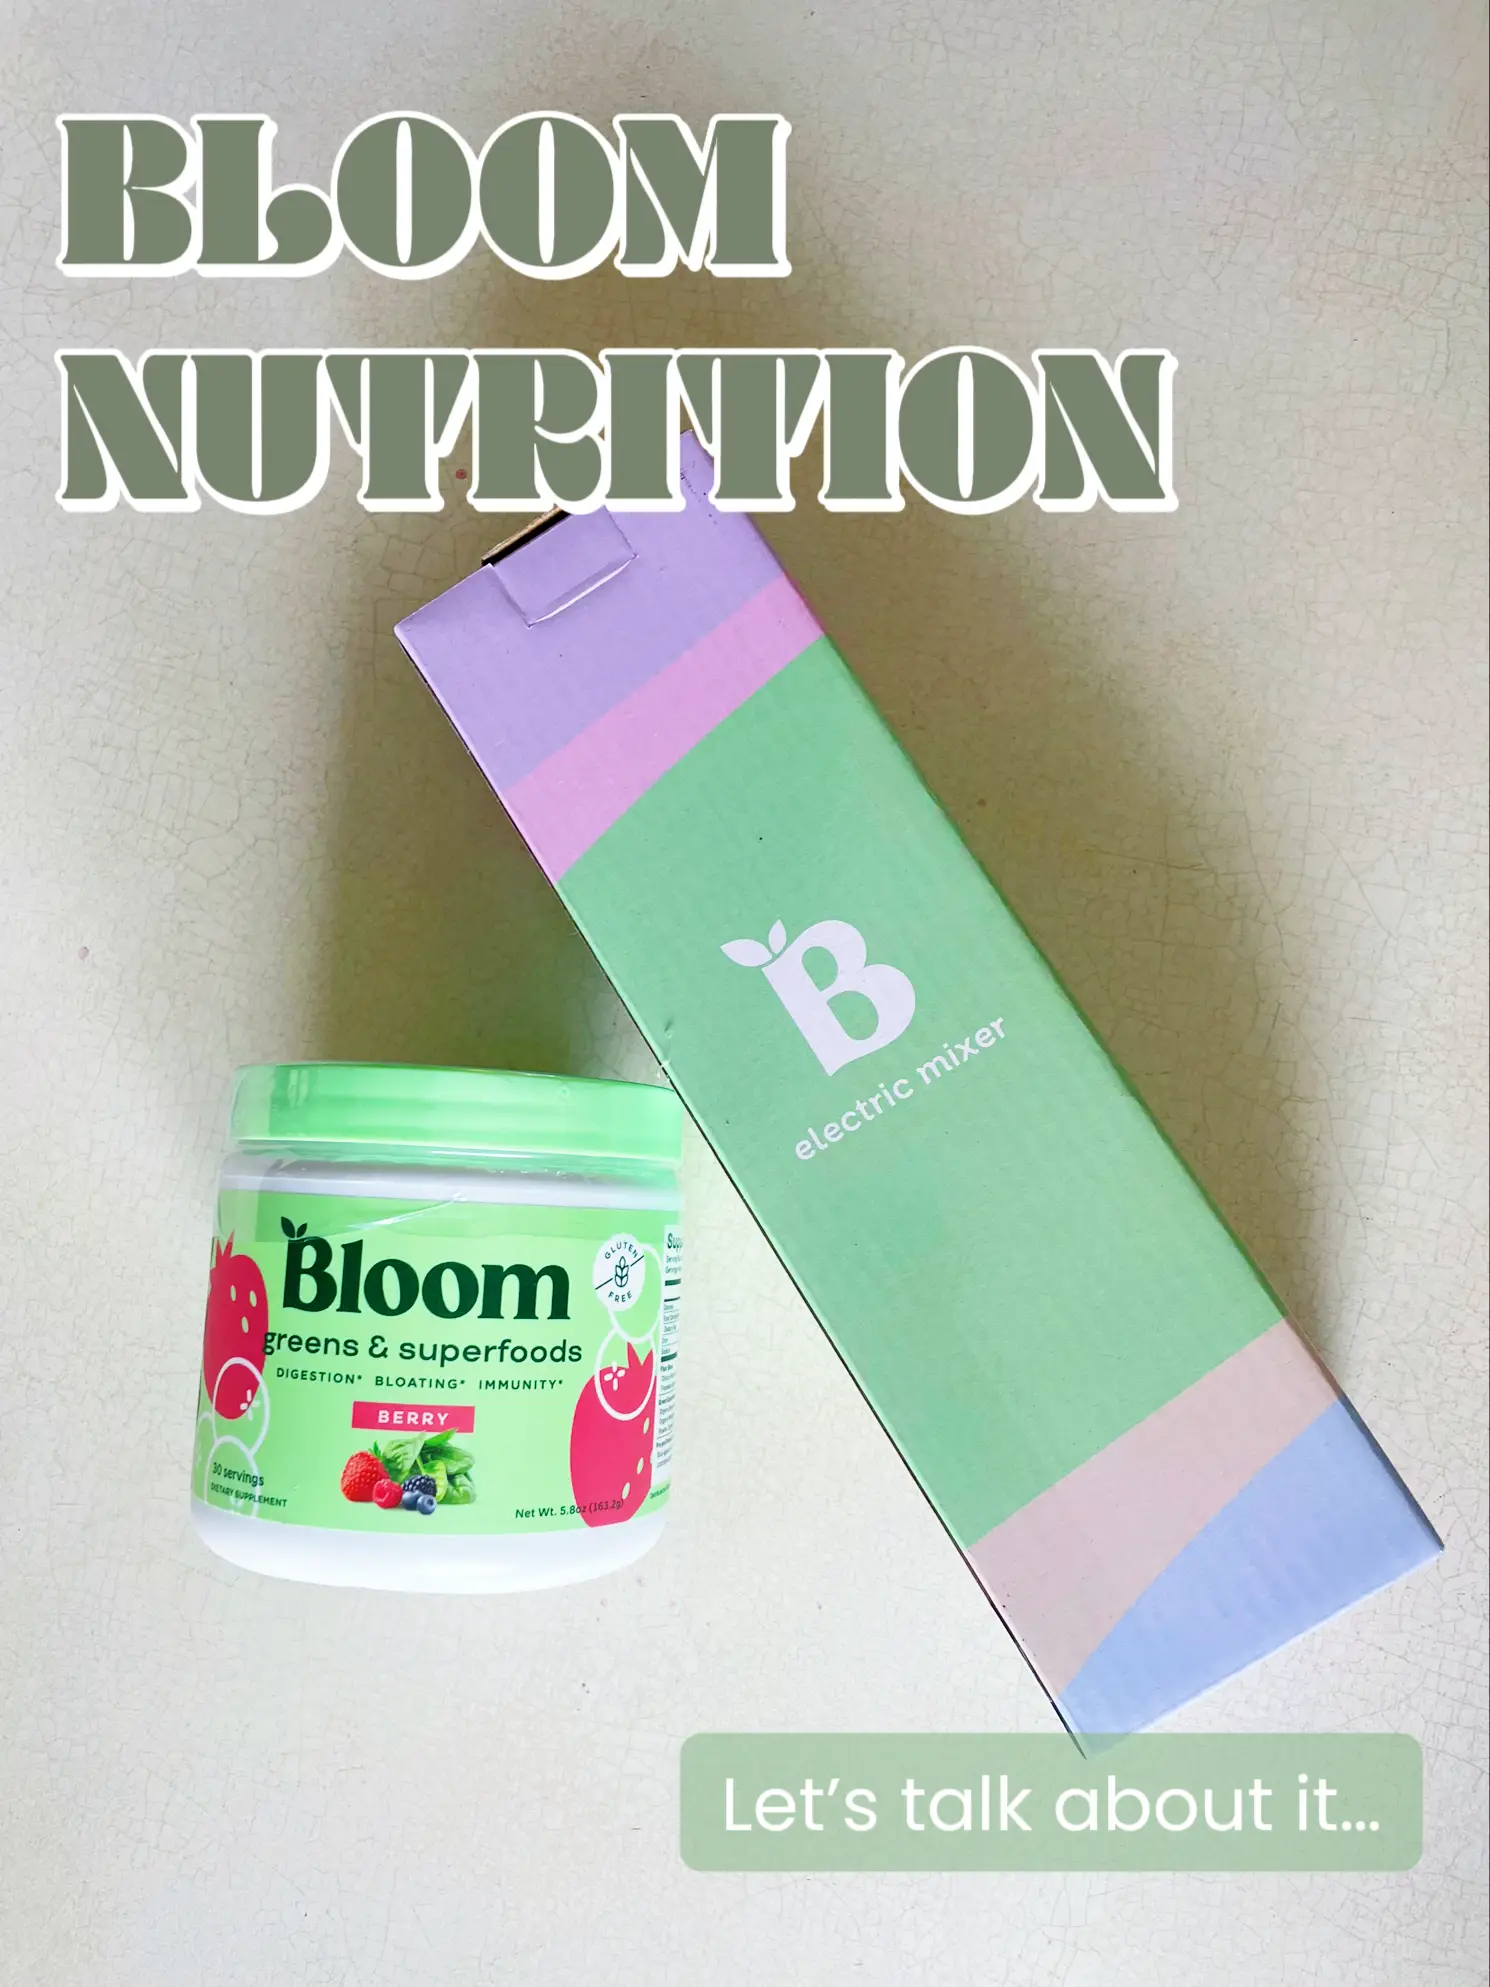 Bloom Nutrition… Let's Talk About It💚, Gallery posted by Grace Kickham🌷